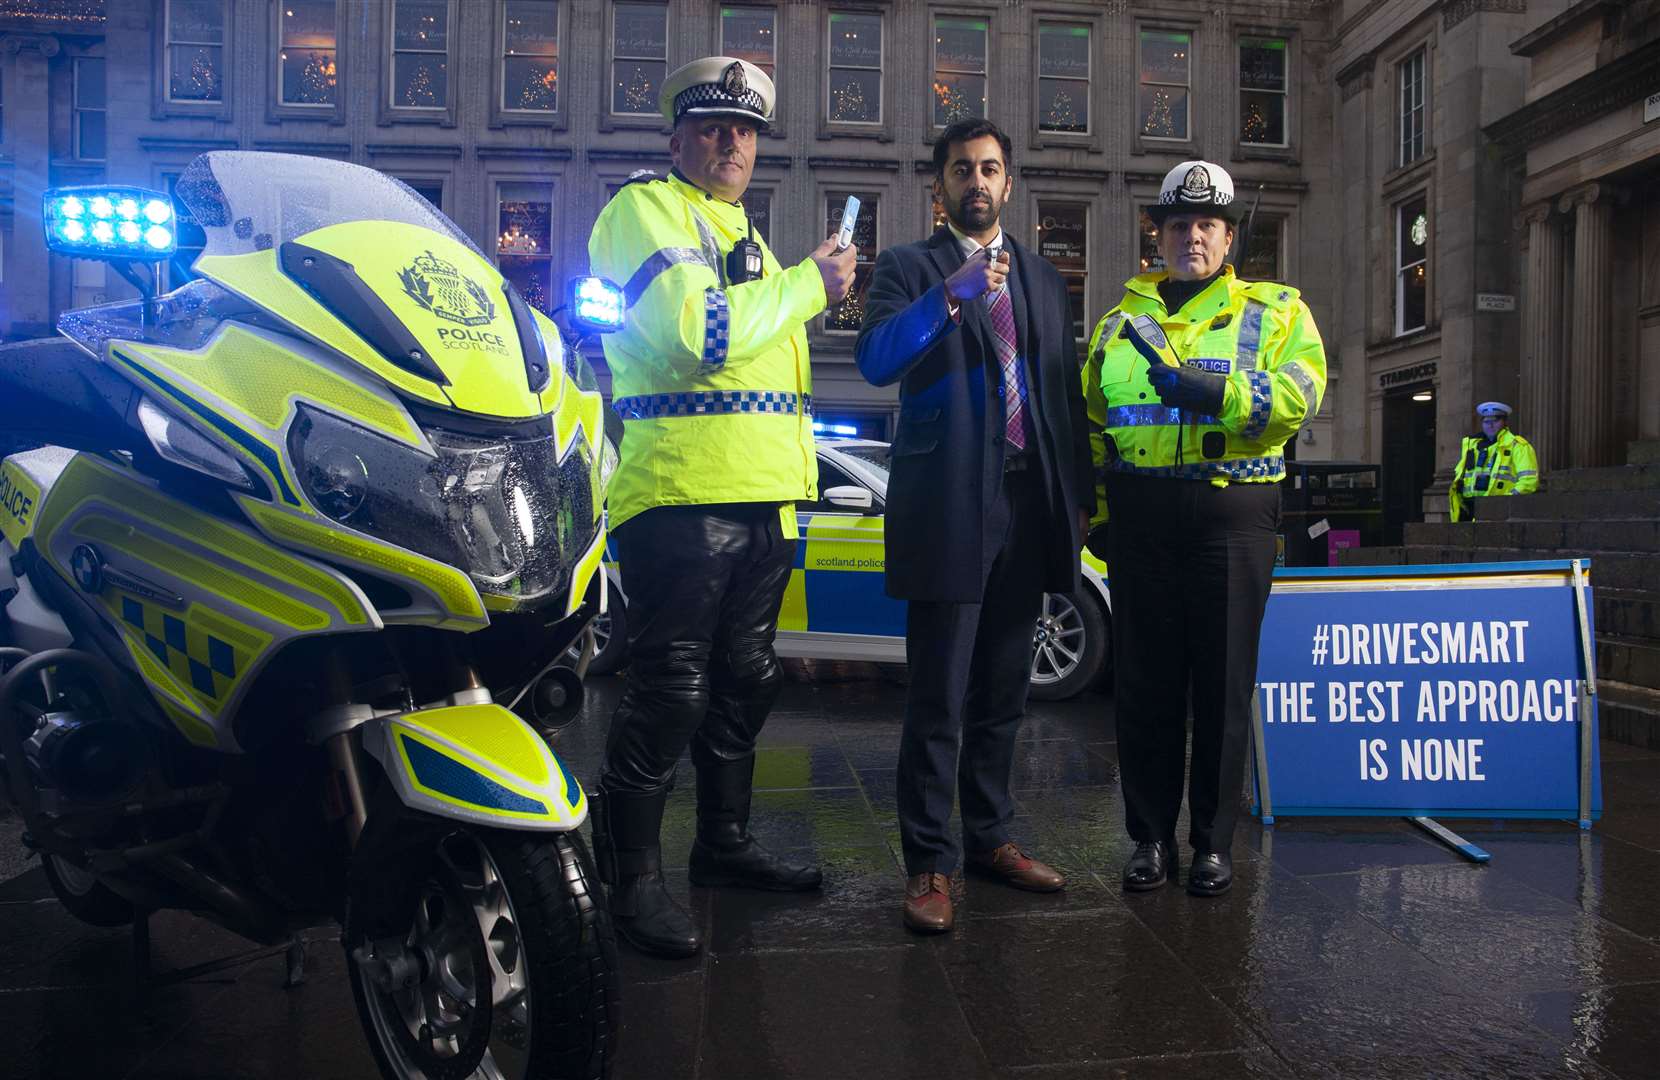 Drive Smart has been launched to raise awareness of drink or drug driving in the Highlands.